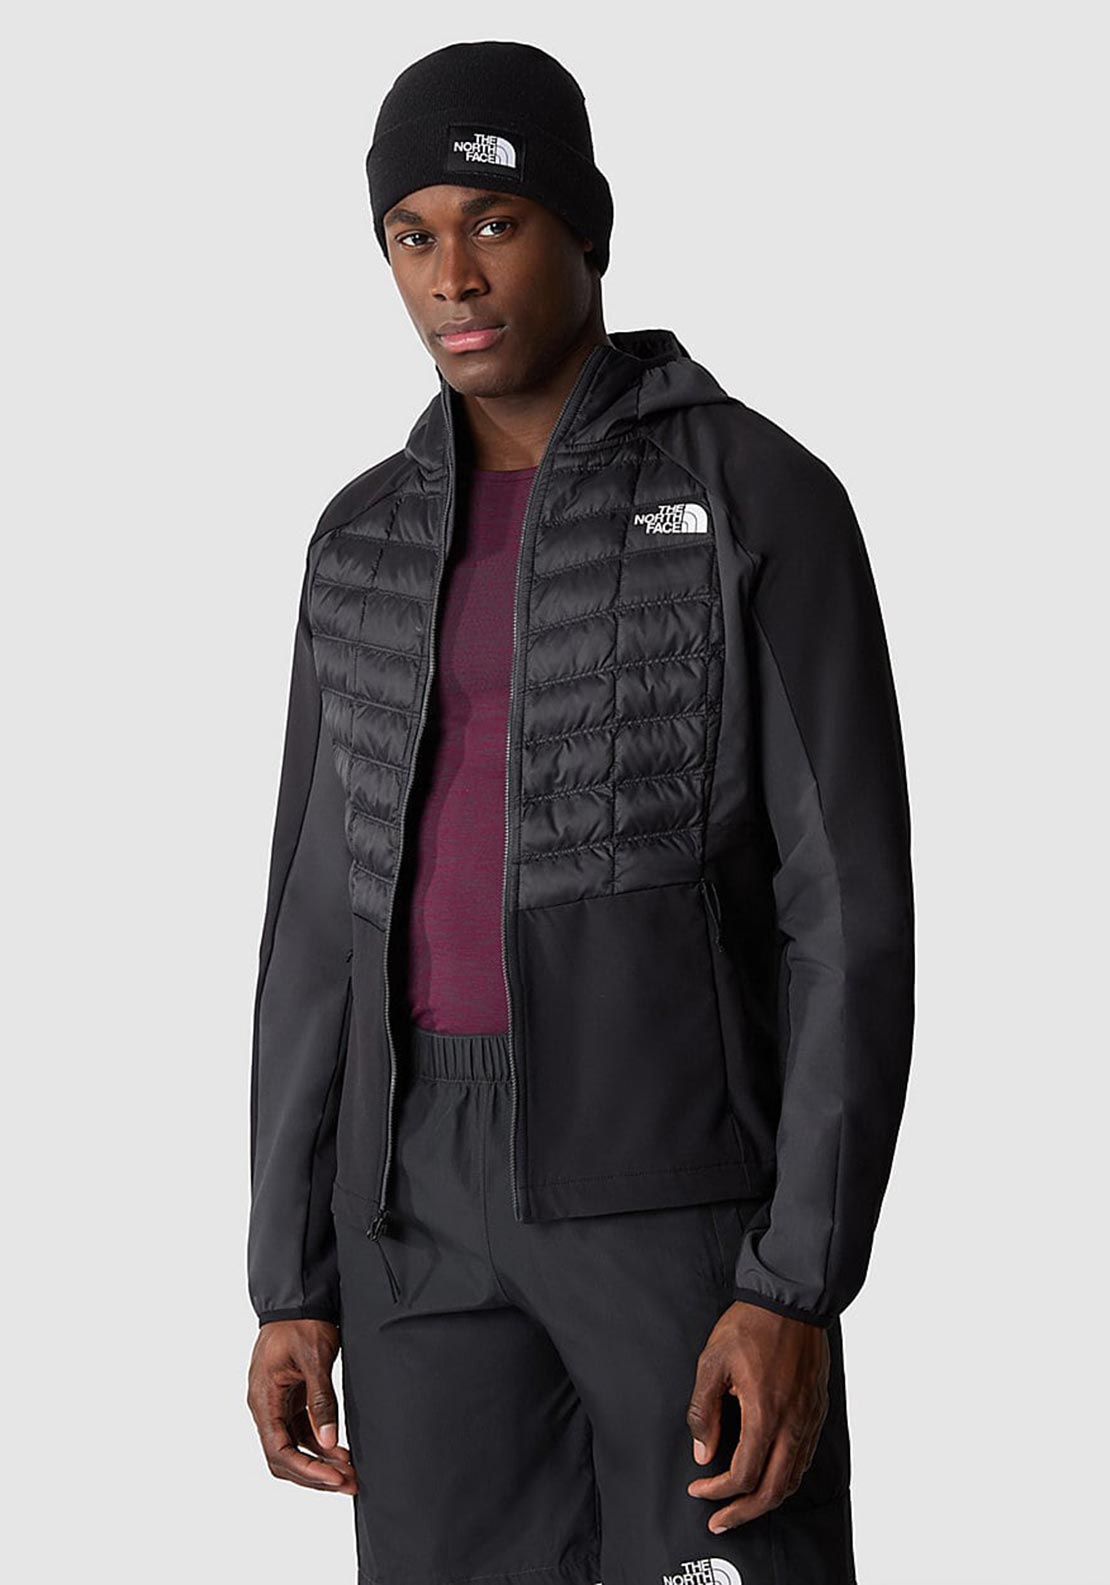 Buy The North Face Mountain Athletics Sports Top - Grey At 9% Off